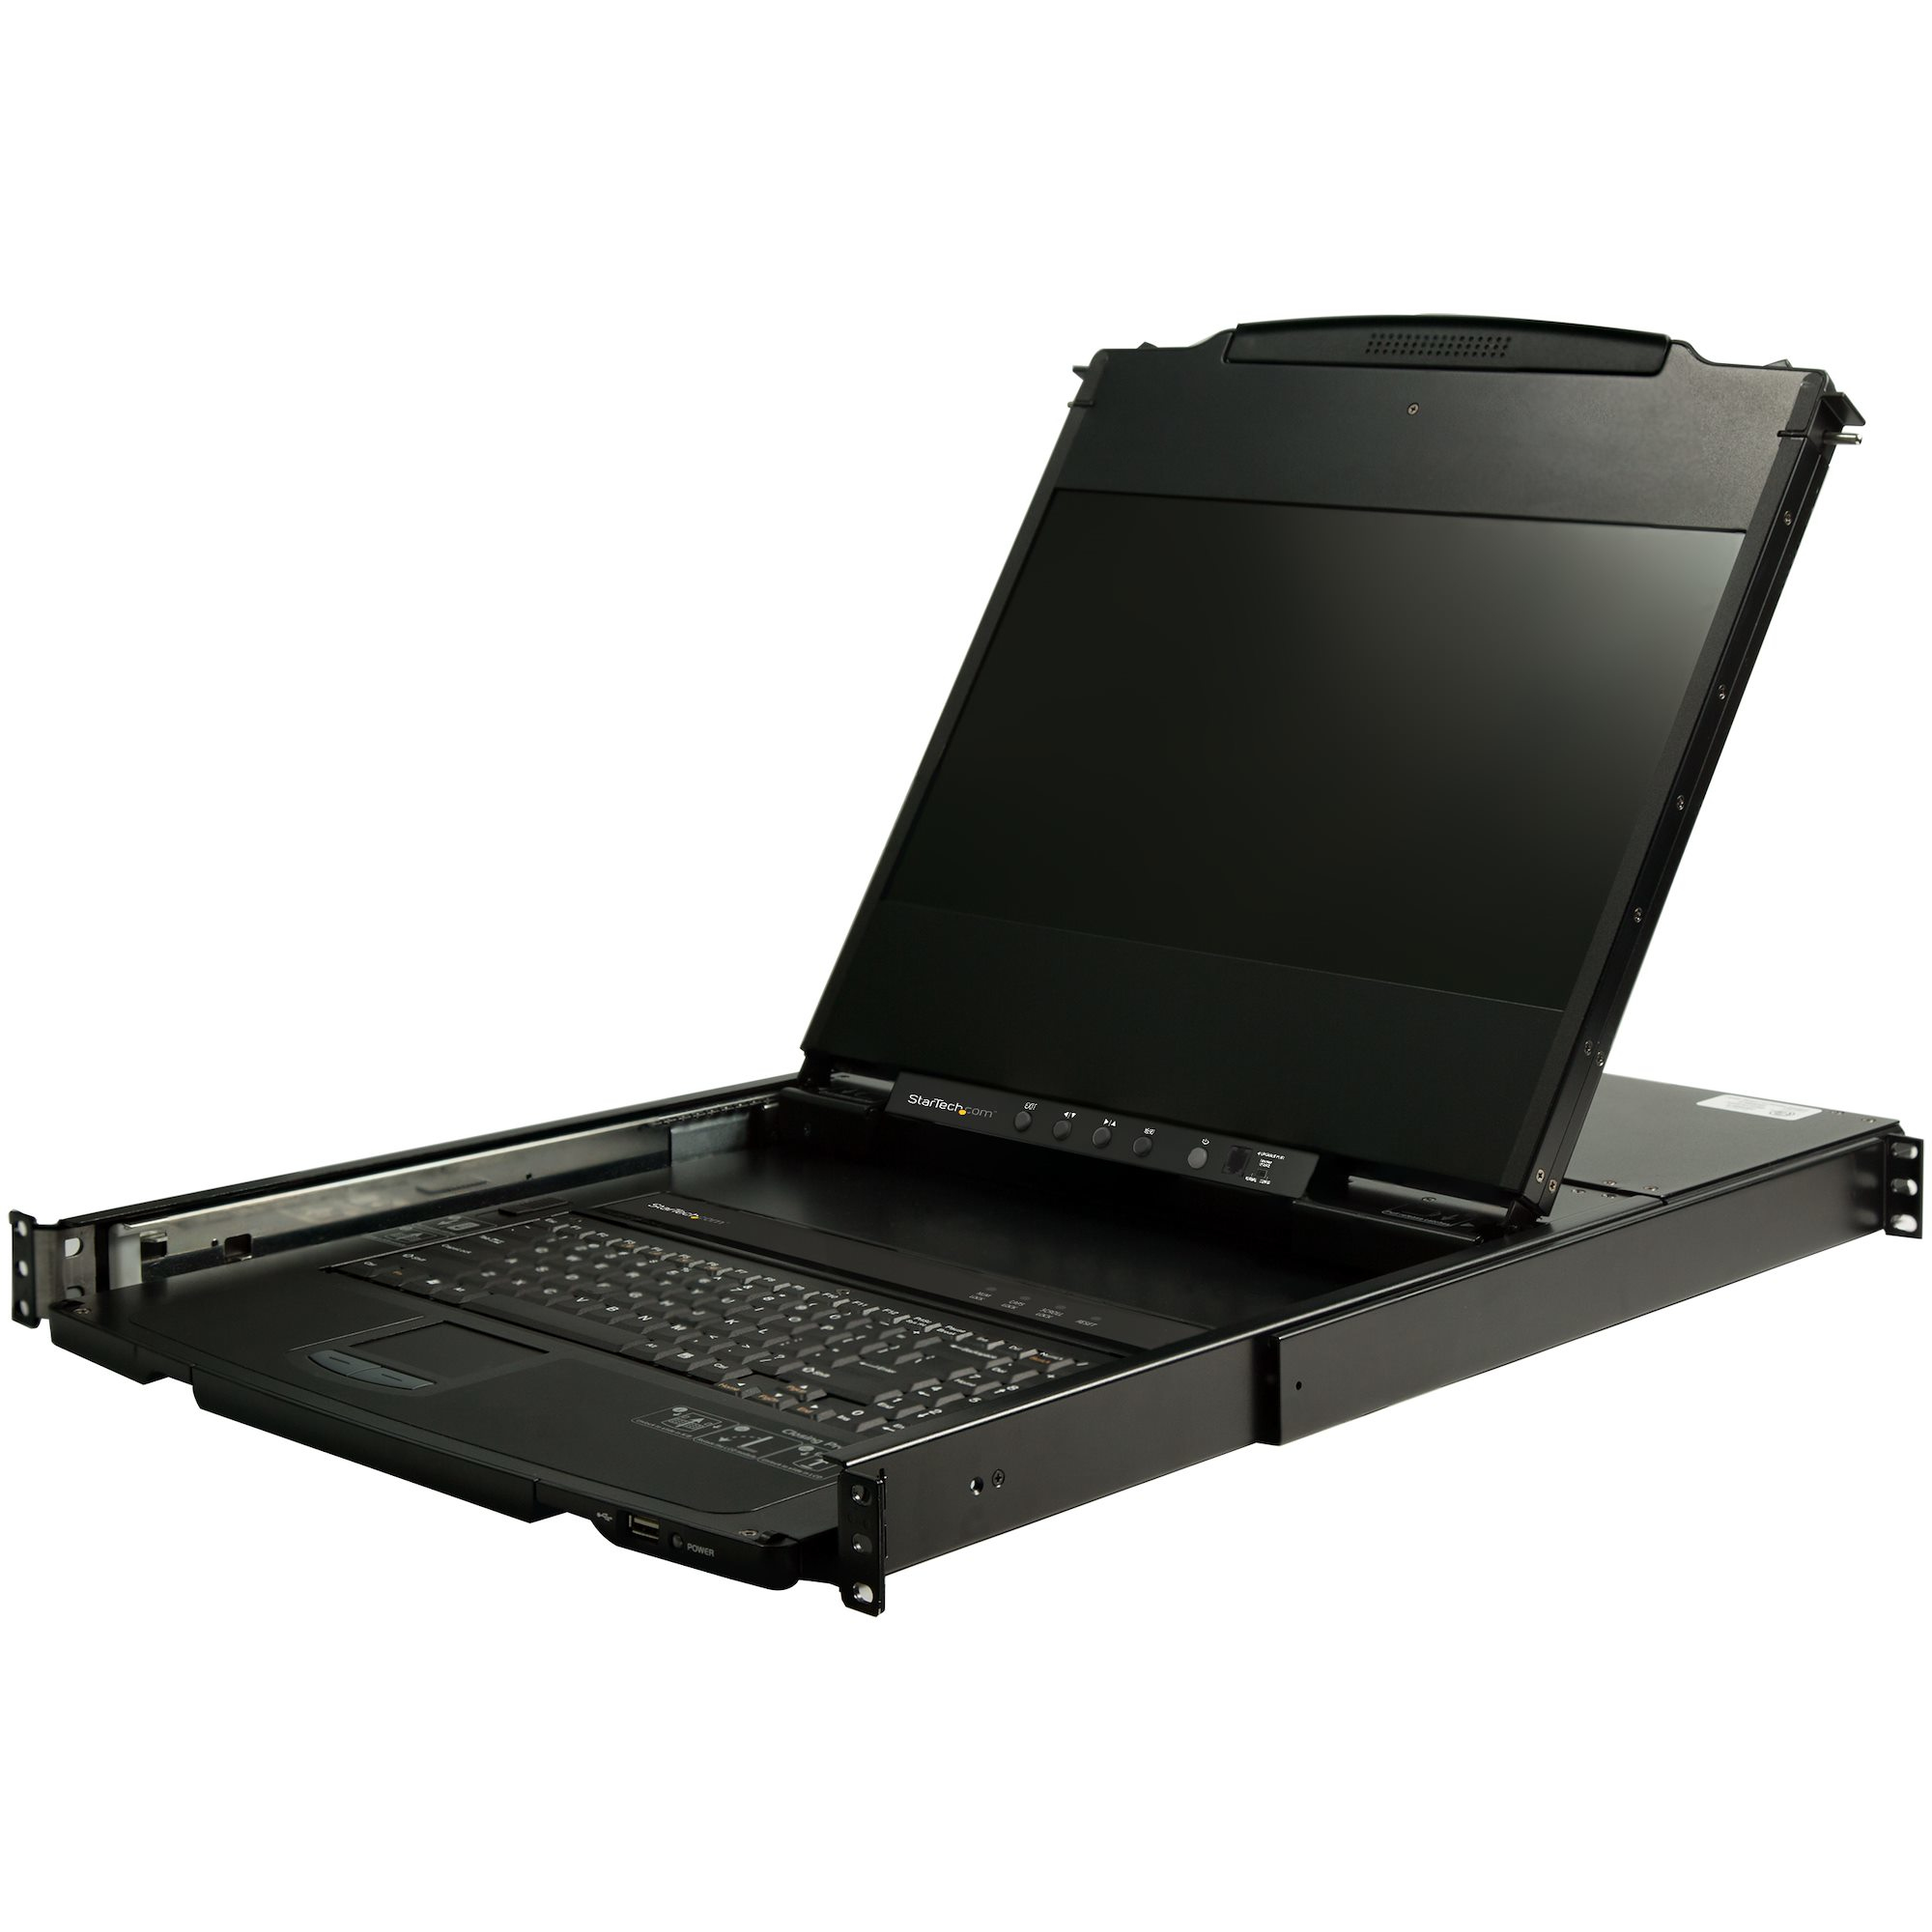 StarTech.com Dual Rail Rackmount KVM Console HD 1080p, Single Port DVI/VGA KVM With 17" LCD Monitor For Server Rack, Fully Featured 1U LCD KVM Drawer With Cables, USB Support, 44230 MTBF - Si - C2000